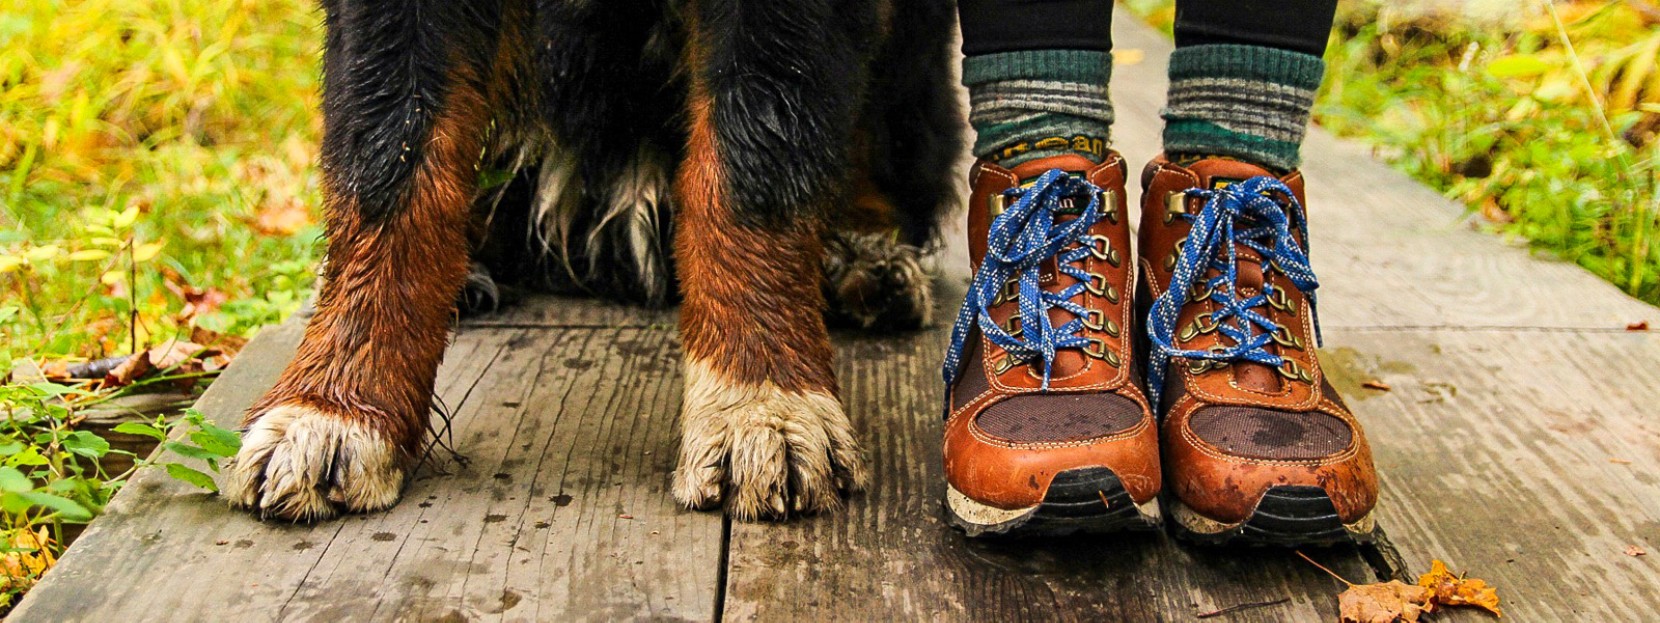 Close-up of the paws of a large wet dog and the feet of a hiker in boots.